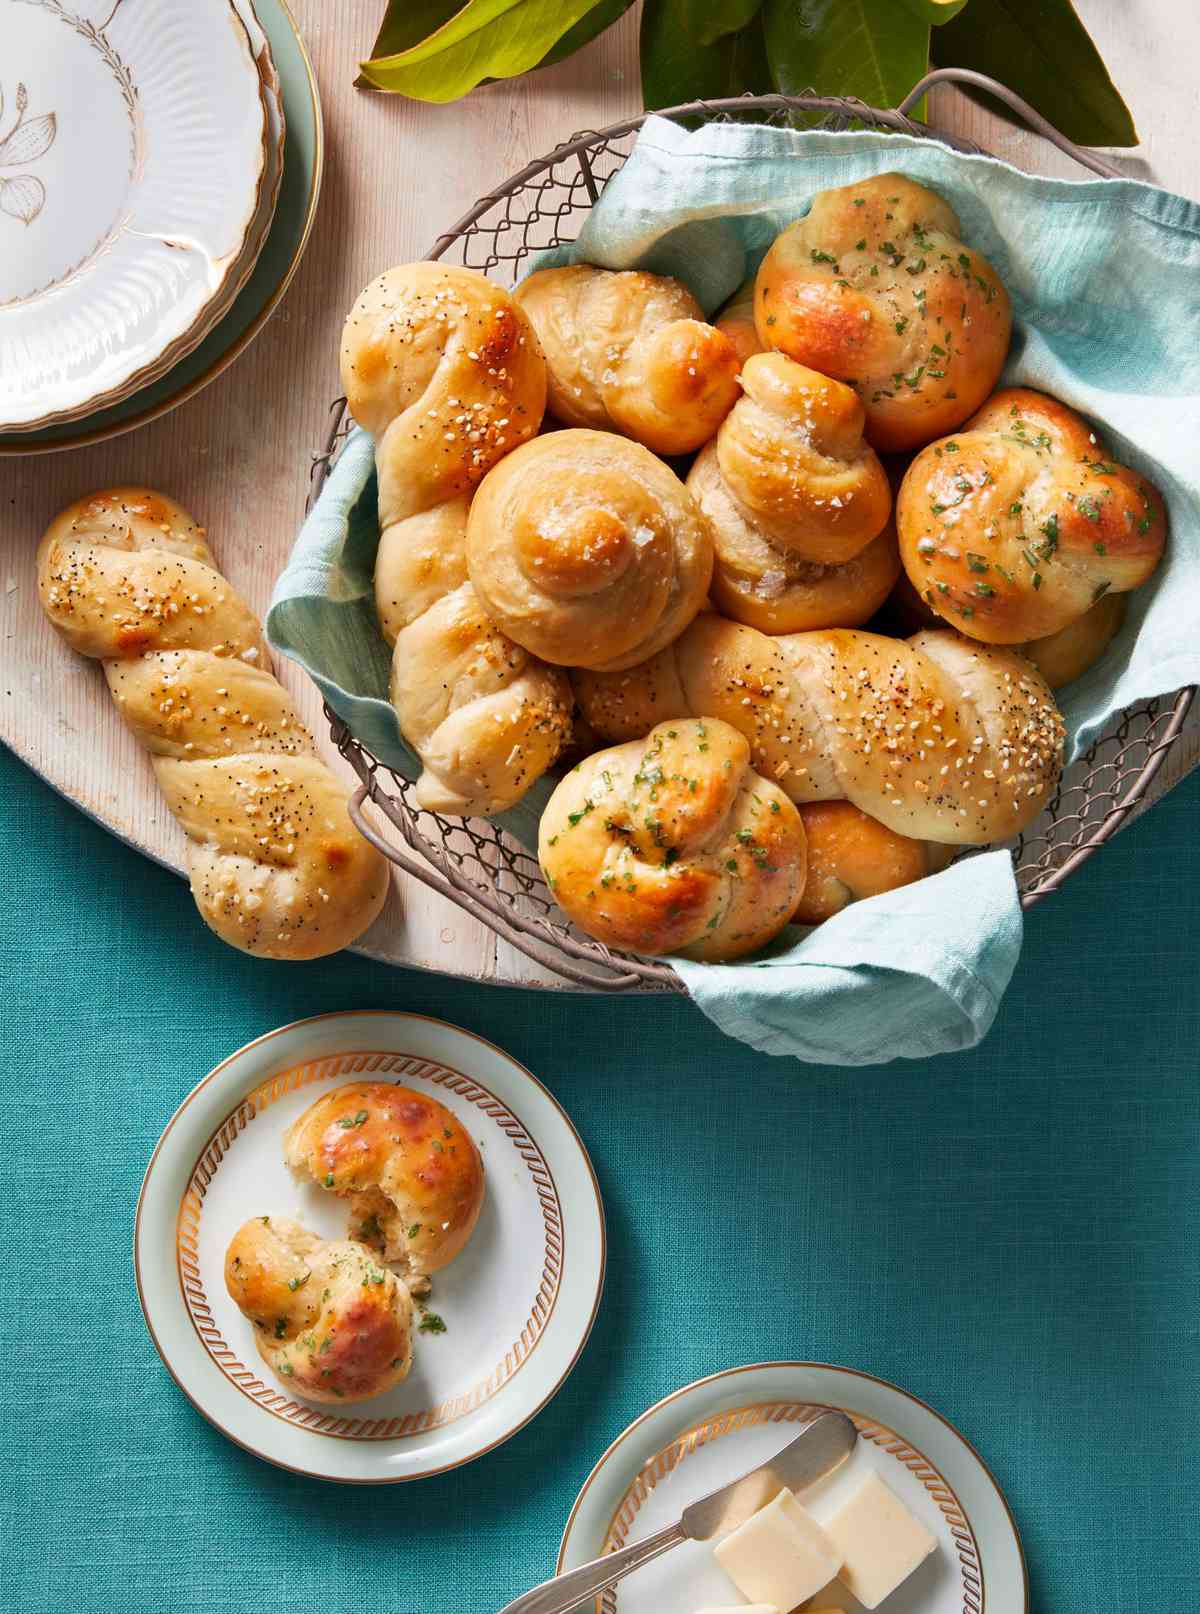 Buttery Yeast Rolls, Twisted Rolls with Everything-Bagel Seasoning, and Knot Rolls with Herb Butter